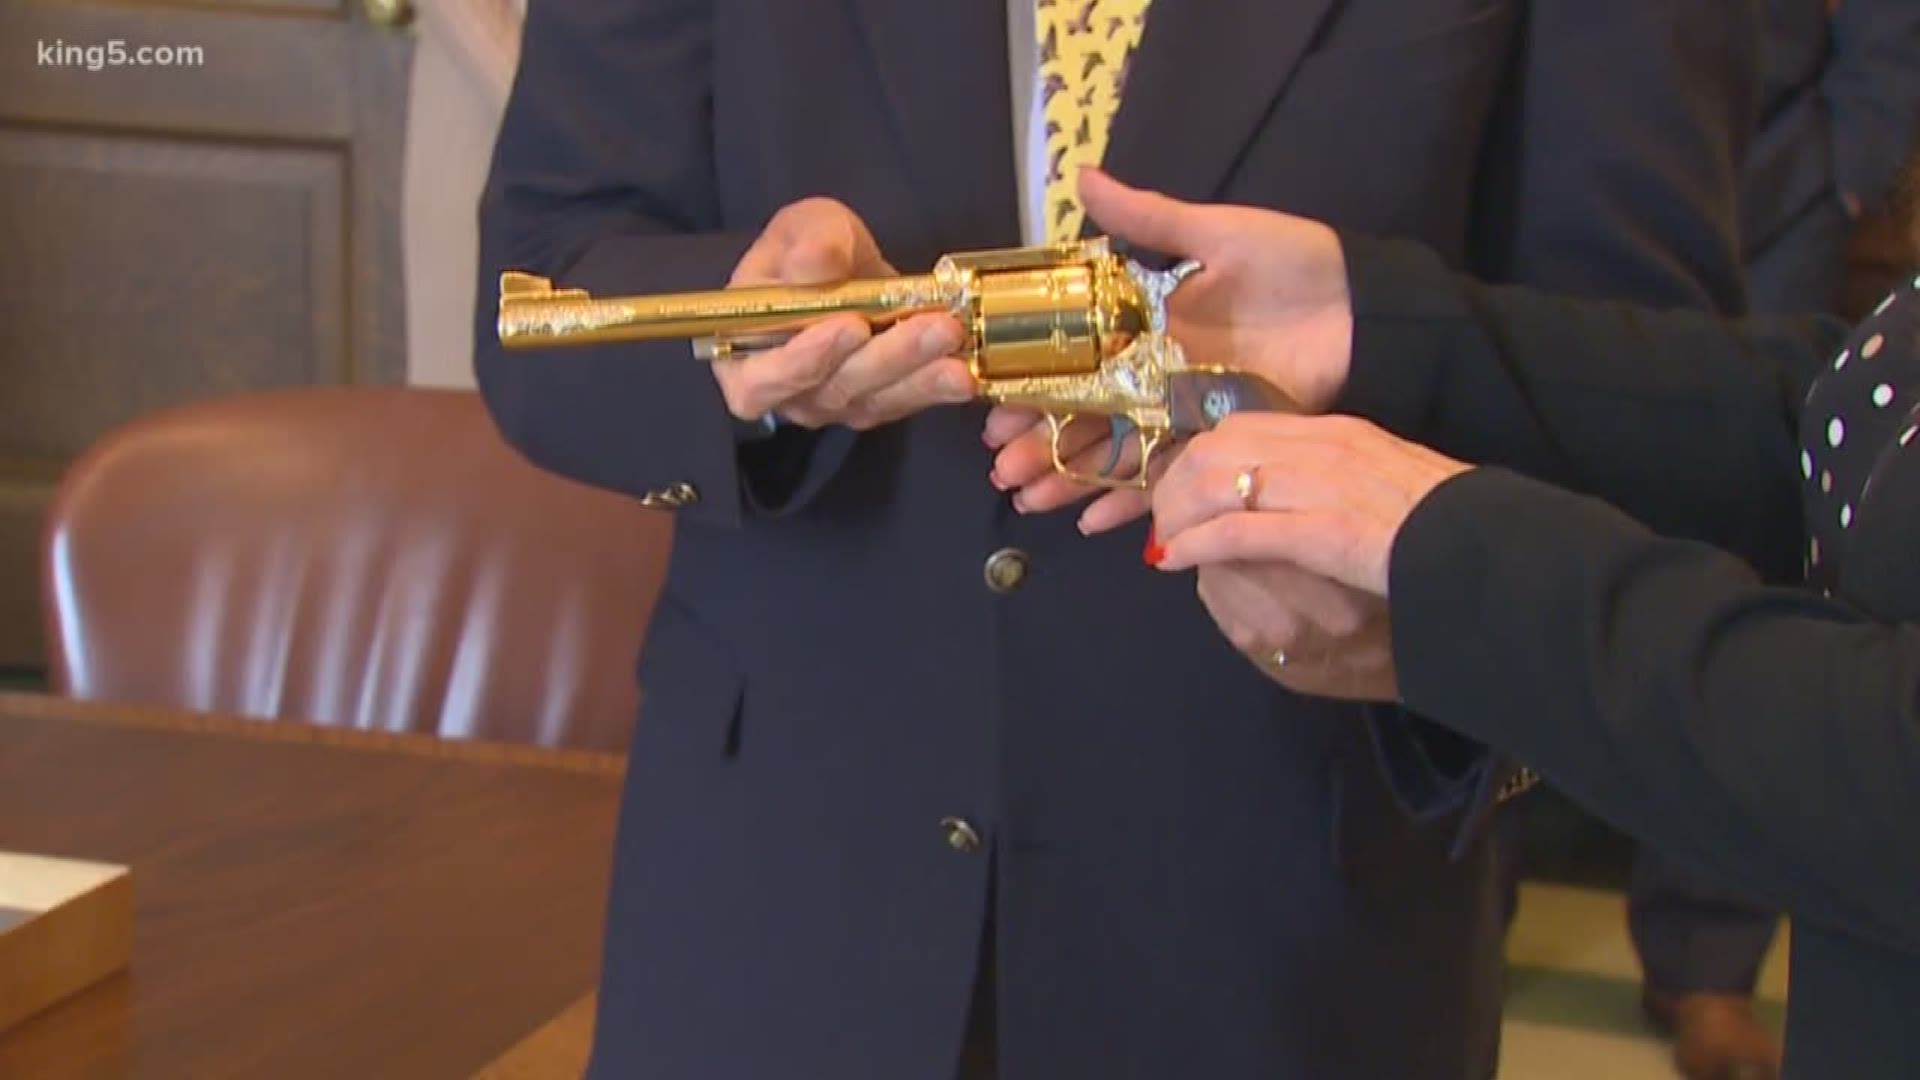 Thirty years after it was stolen, a piece of state history is back at the Capitol in Olympia. The special handgun made to celebrate the state's 100th anniversary, was thought to be lost forever. South Bureau Chief Drew Mikkelsen explains how the case of the "golden gun" was solved.